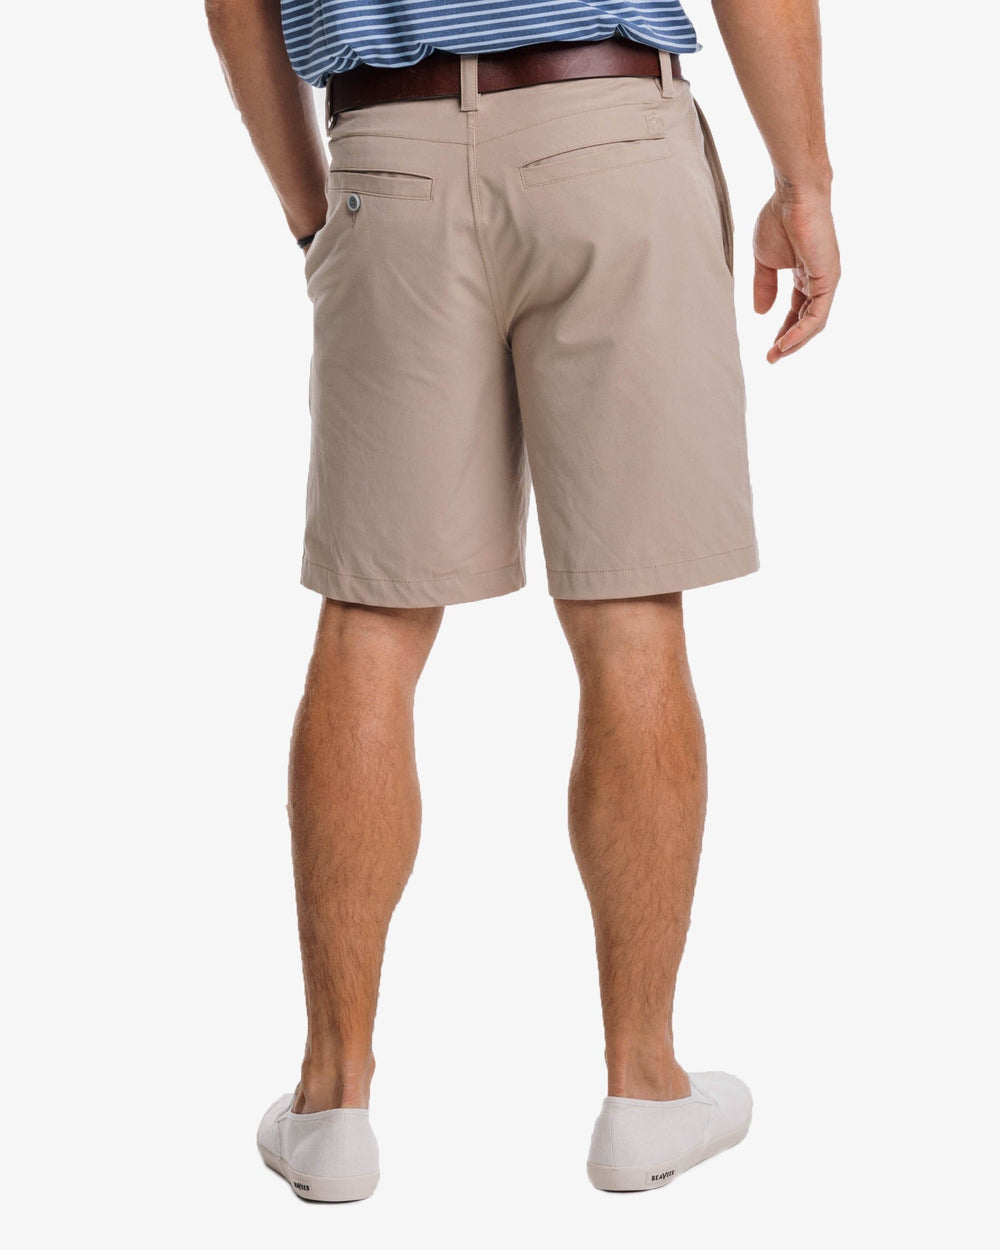 The back view of the Southern Tide T3 Gulf 9 Inch Performance Short by Southern Tide - Sandstone Khaki